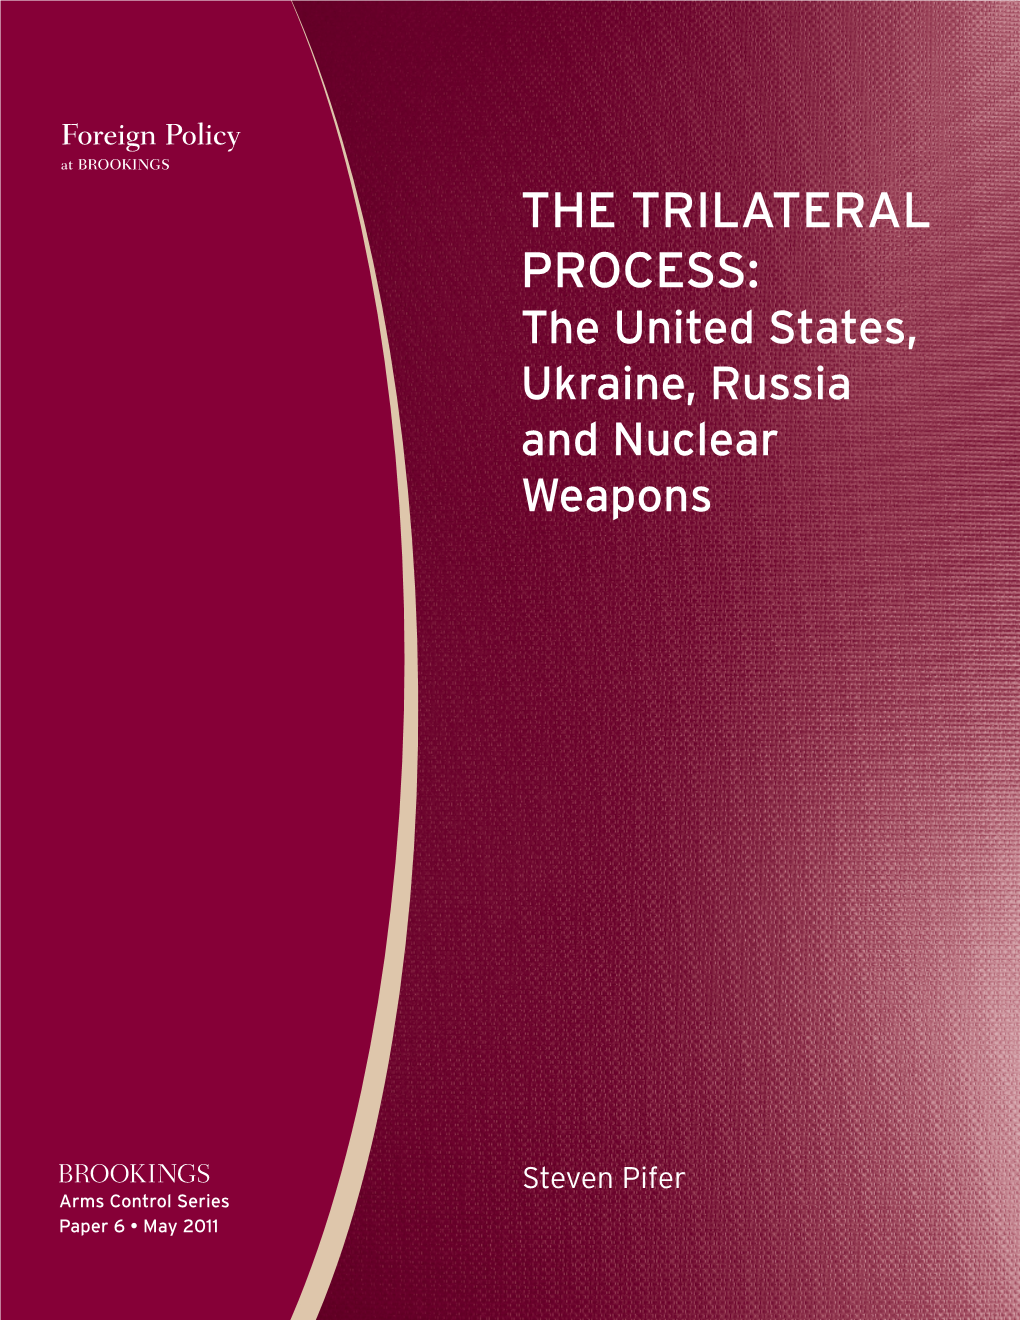 The Trilateral Process: the United States, Ukraine, Russia and Nuclear Weapons